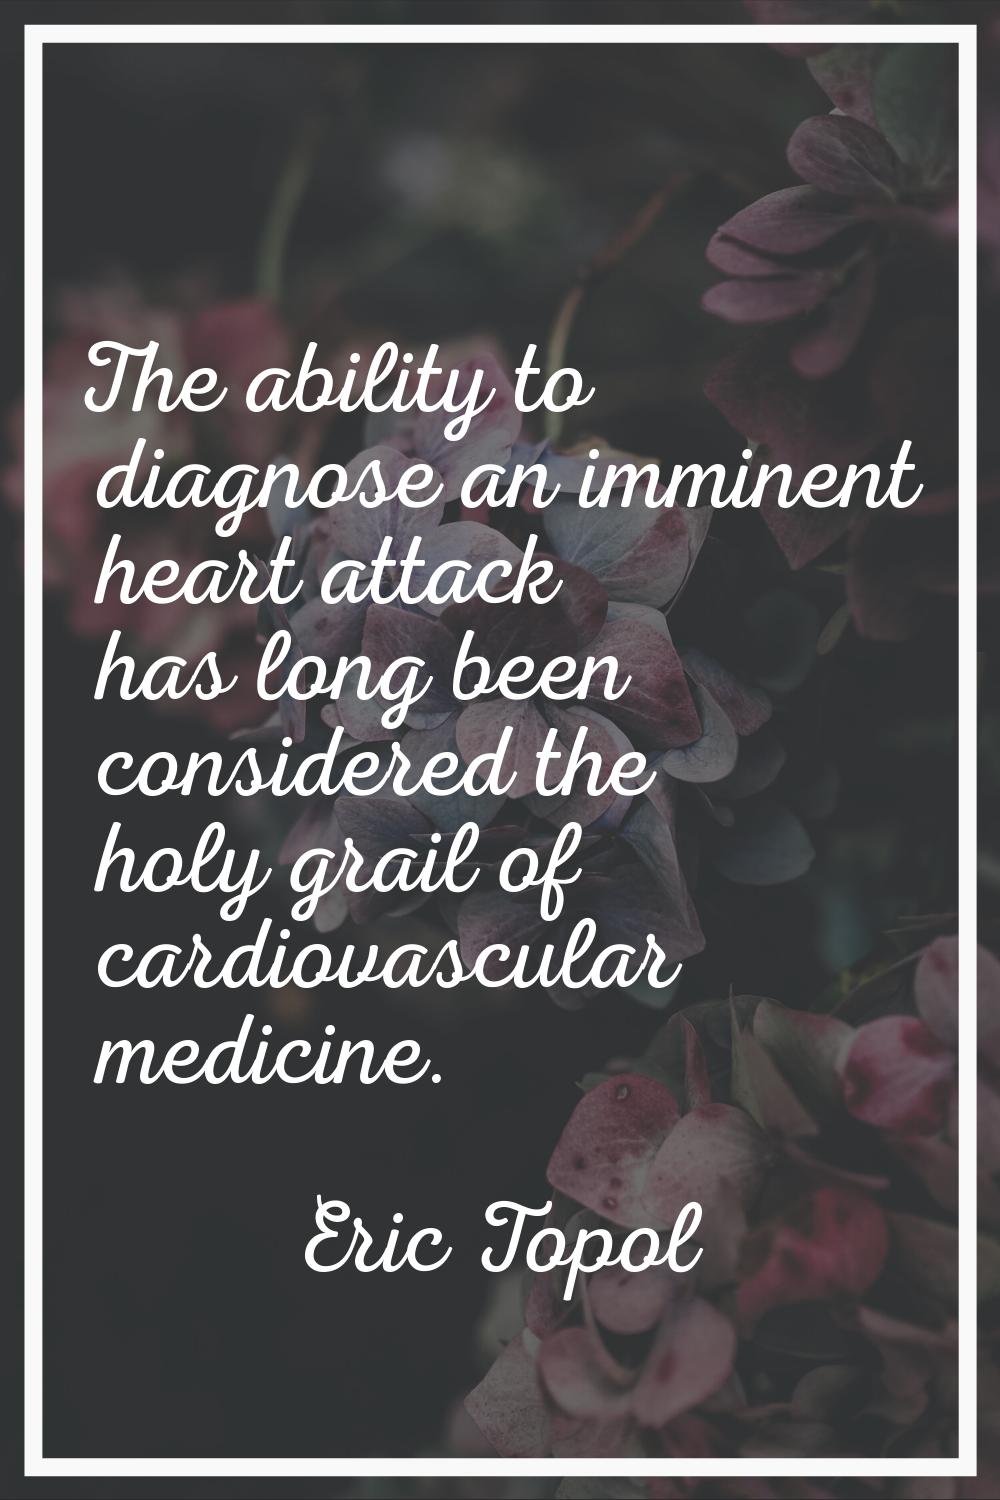 The ability to diagnose an imminent heart attack has long been considered the holy grail of cardiov